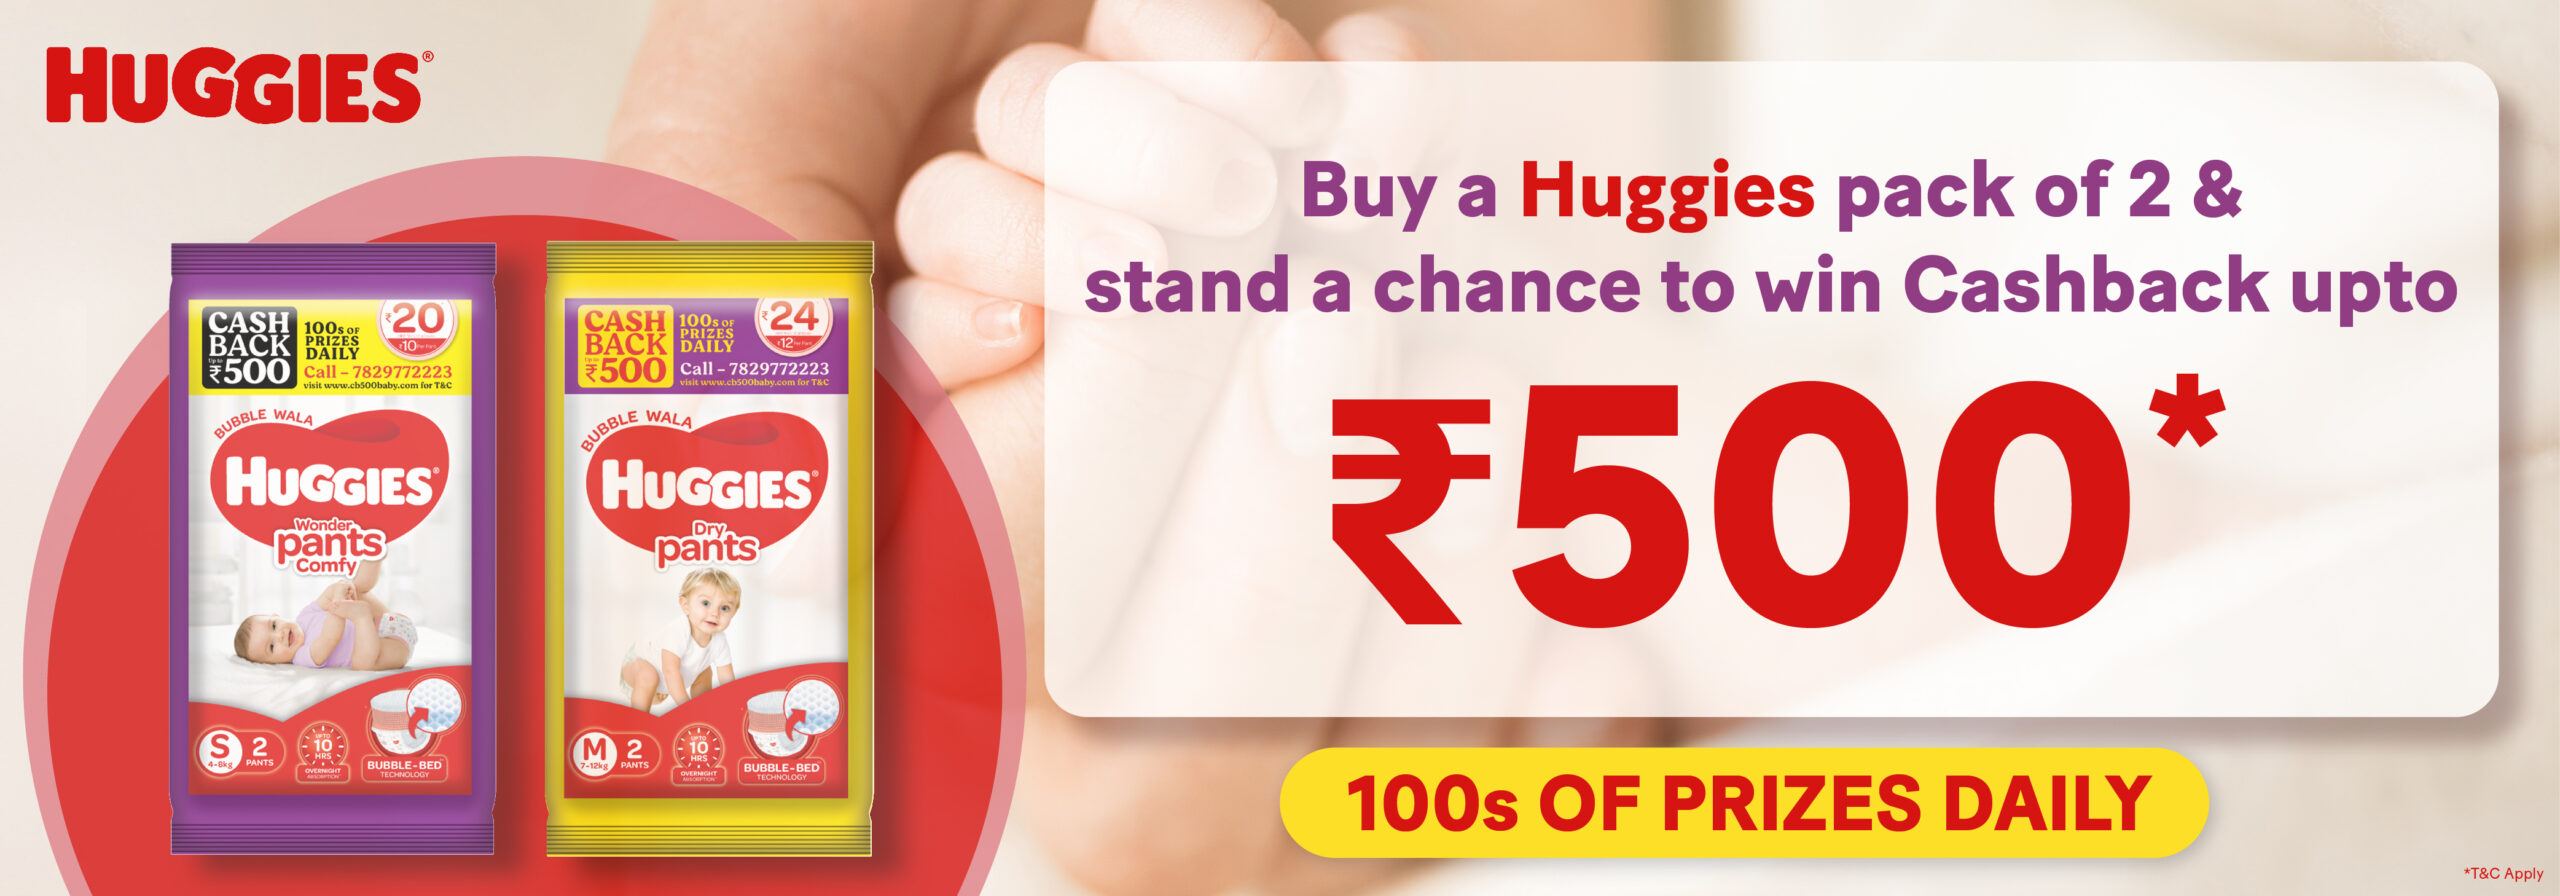 Huggies Contest Send Simple SMS & Get Cashback Up to ₹500 In Bank